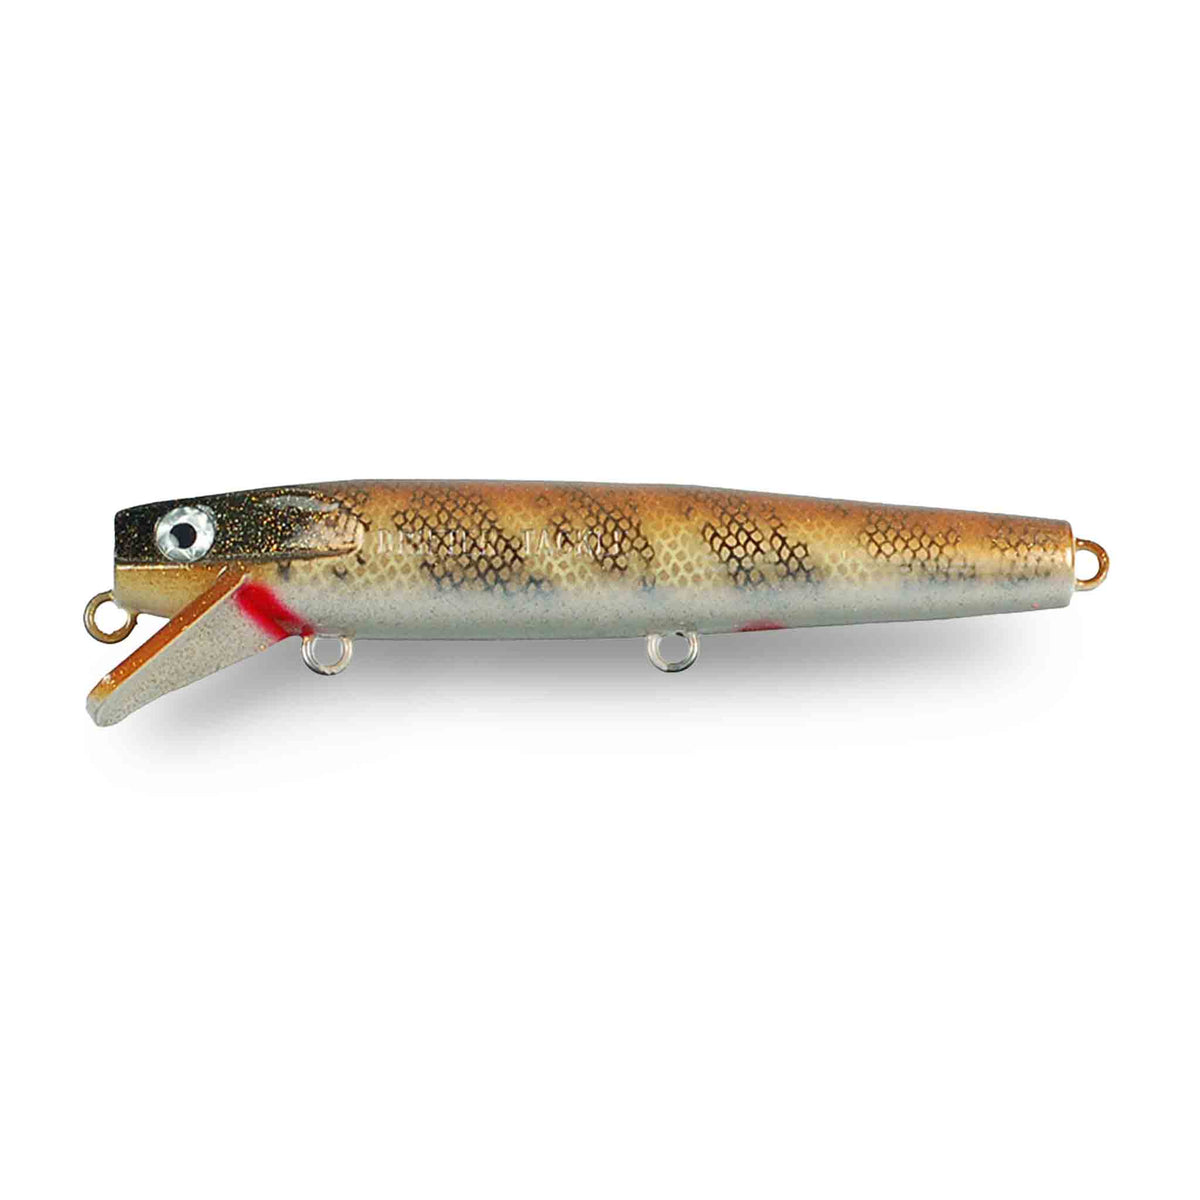 View of Crankbaits Drifter Tackle Muskie Stalker 6'' Straight Crankbait Naturel Walleye available at EZOKO Pike and Musky Shop